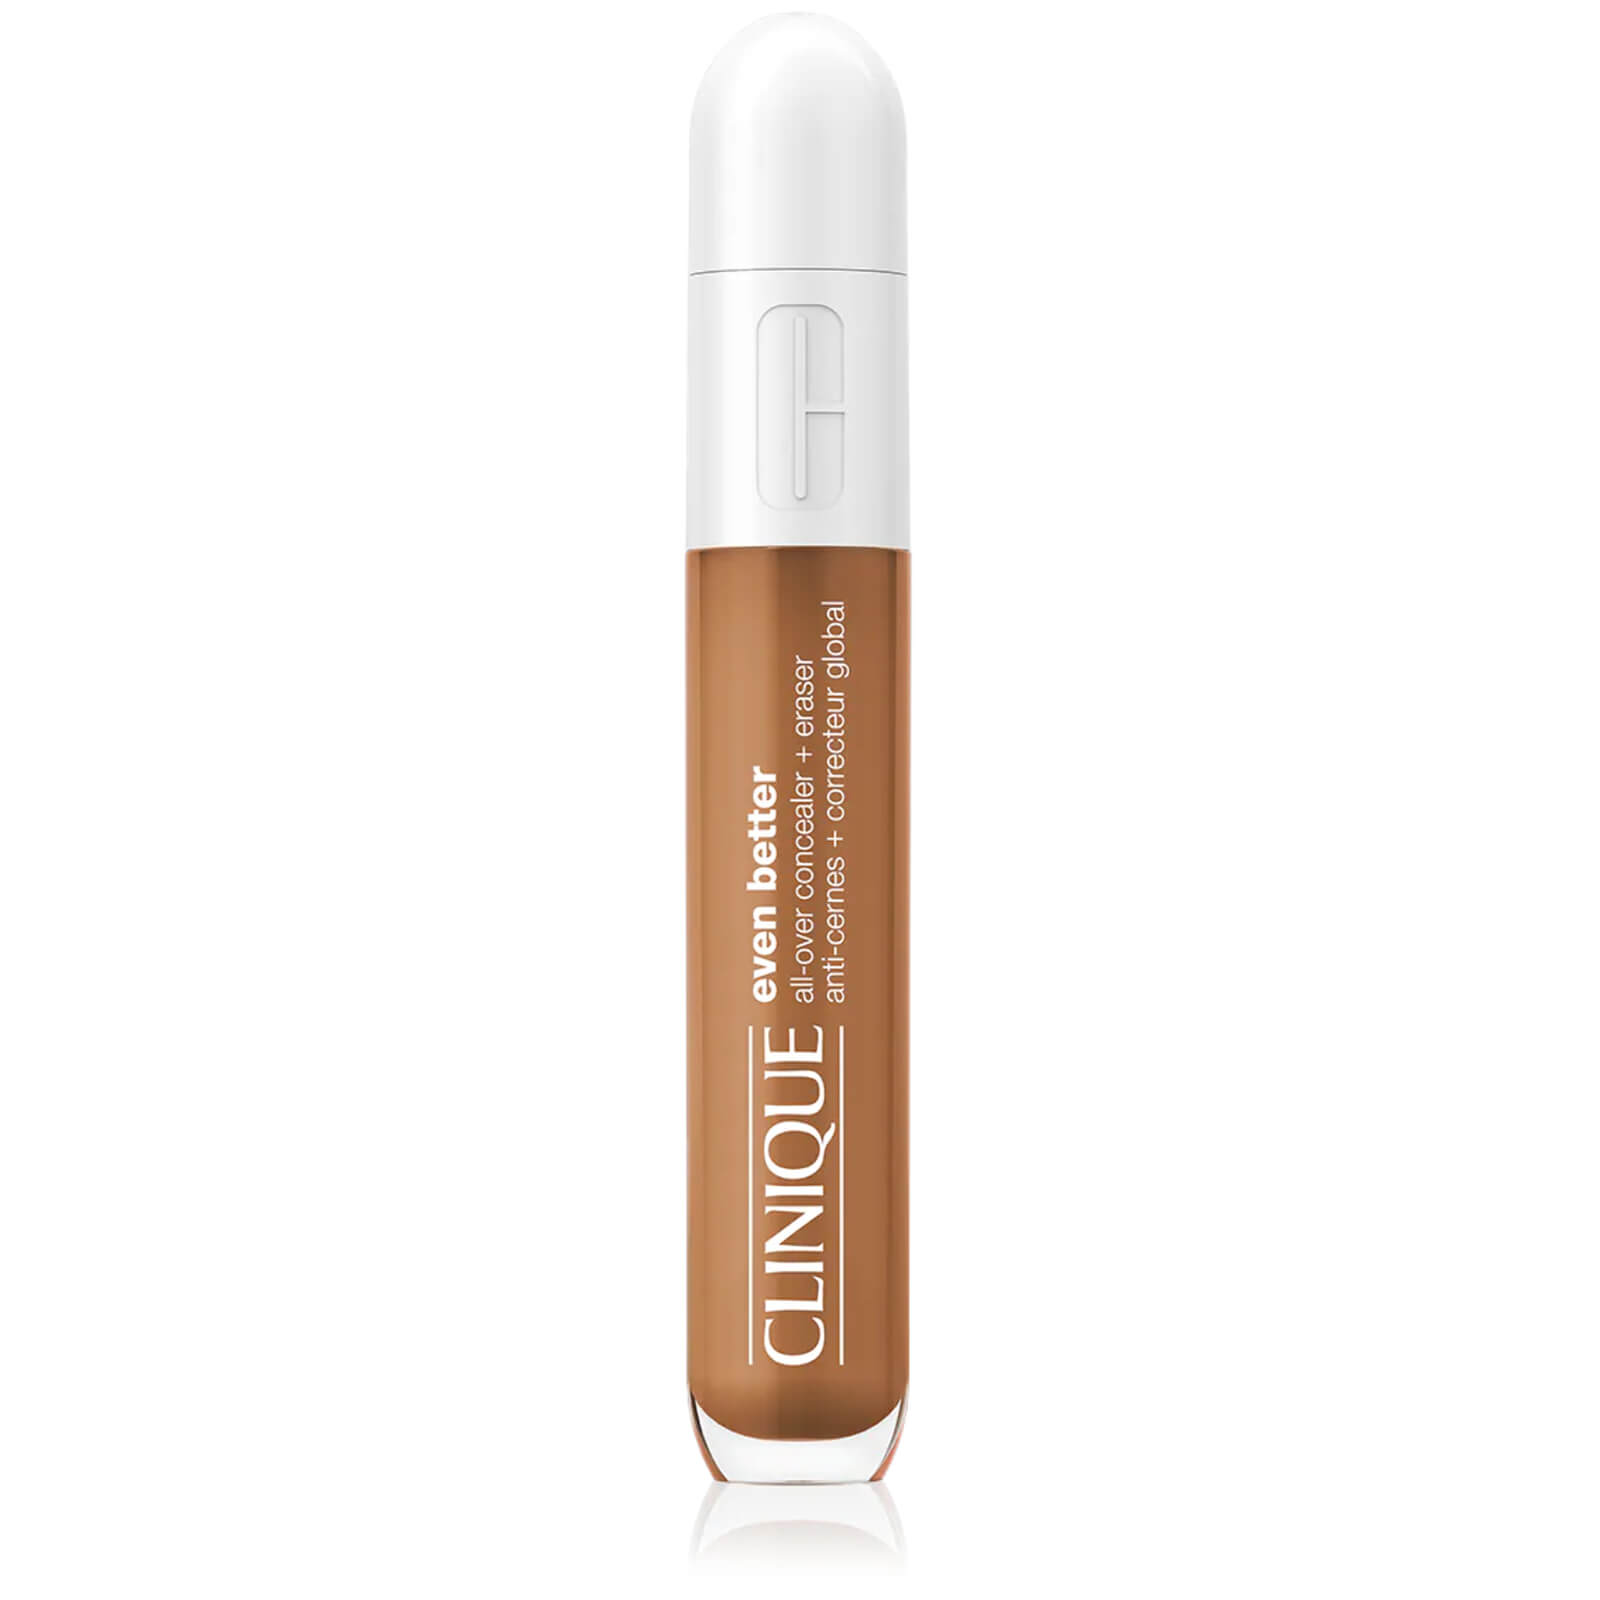 Clinique Even Better All-Over Concealer and Eraser 6ml (Various Shades) - WN 122 Clove